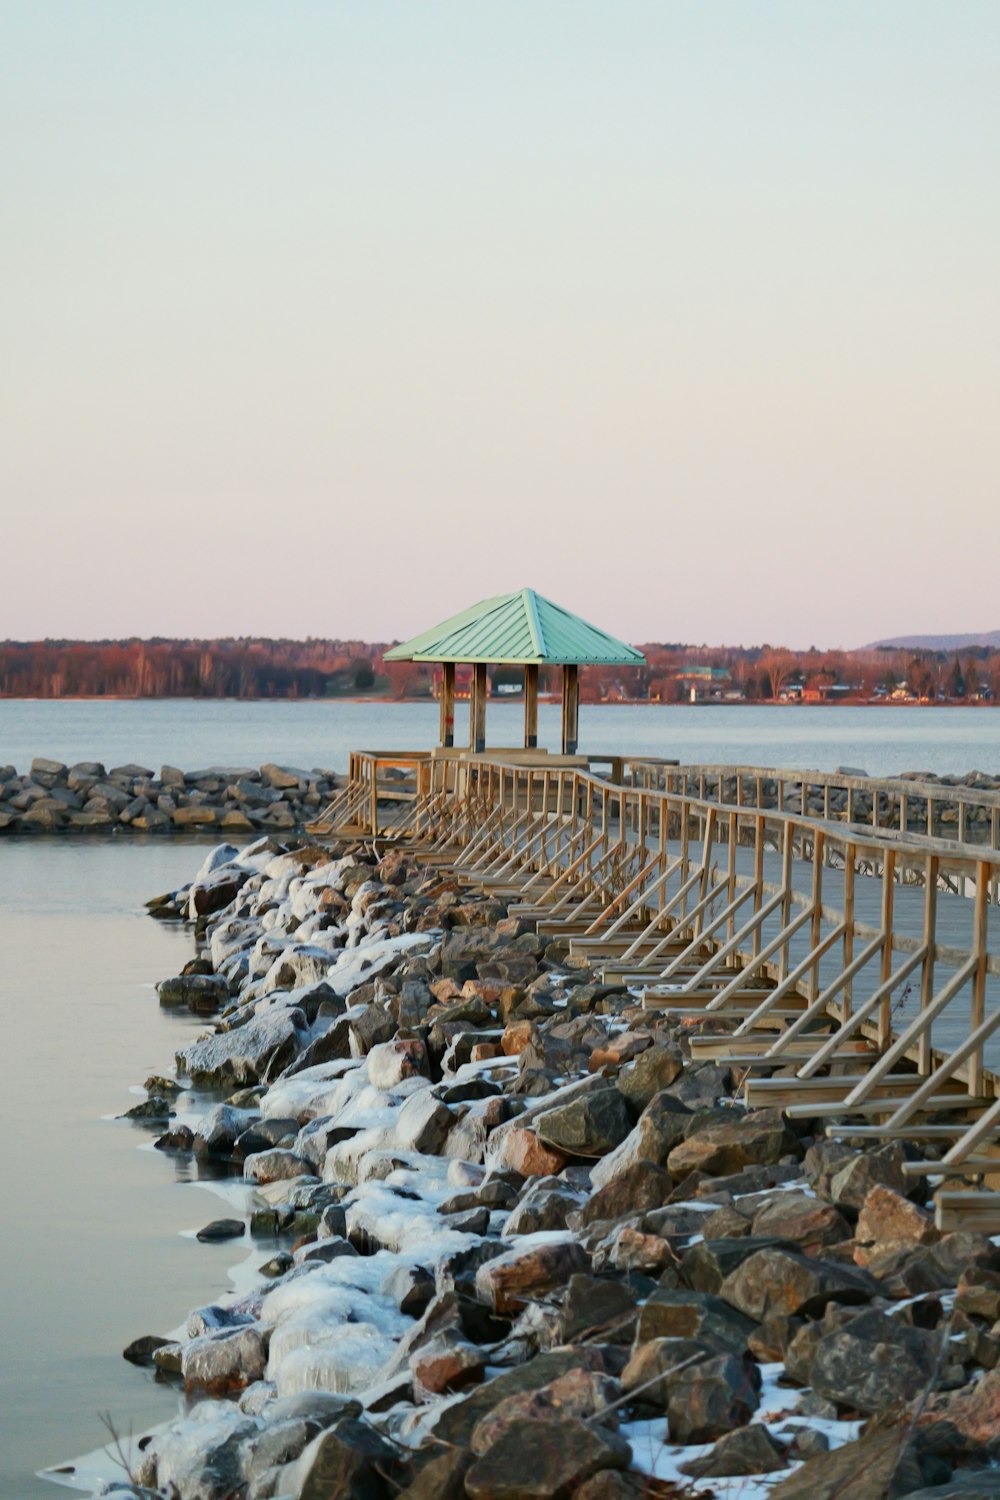 a wooden pier with a green roof next to a body of water